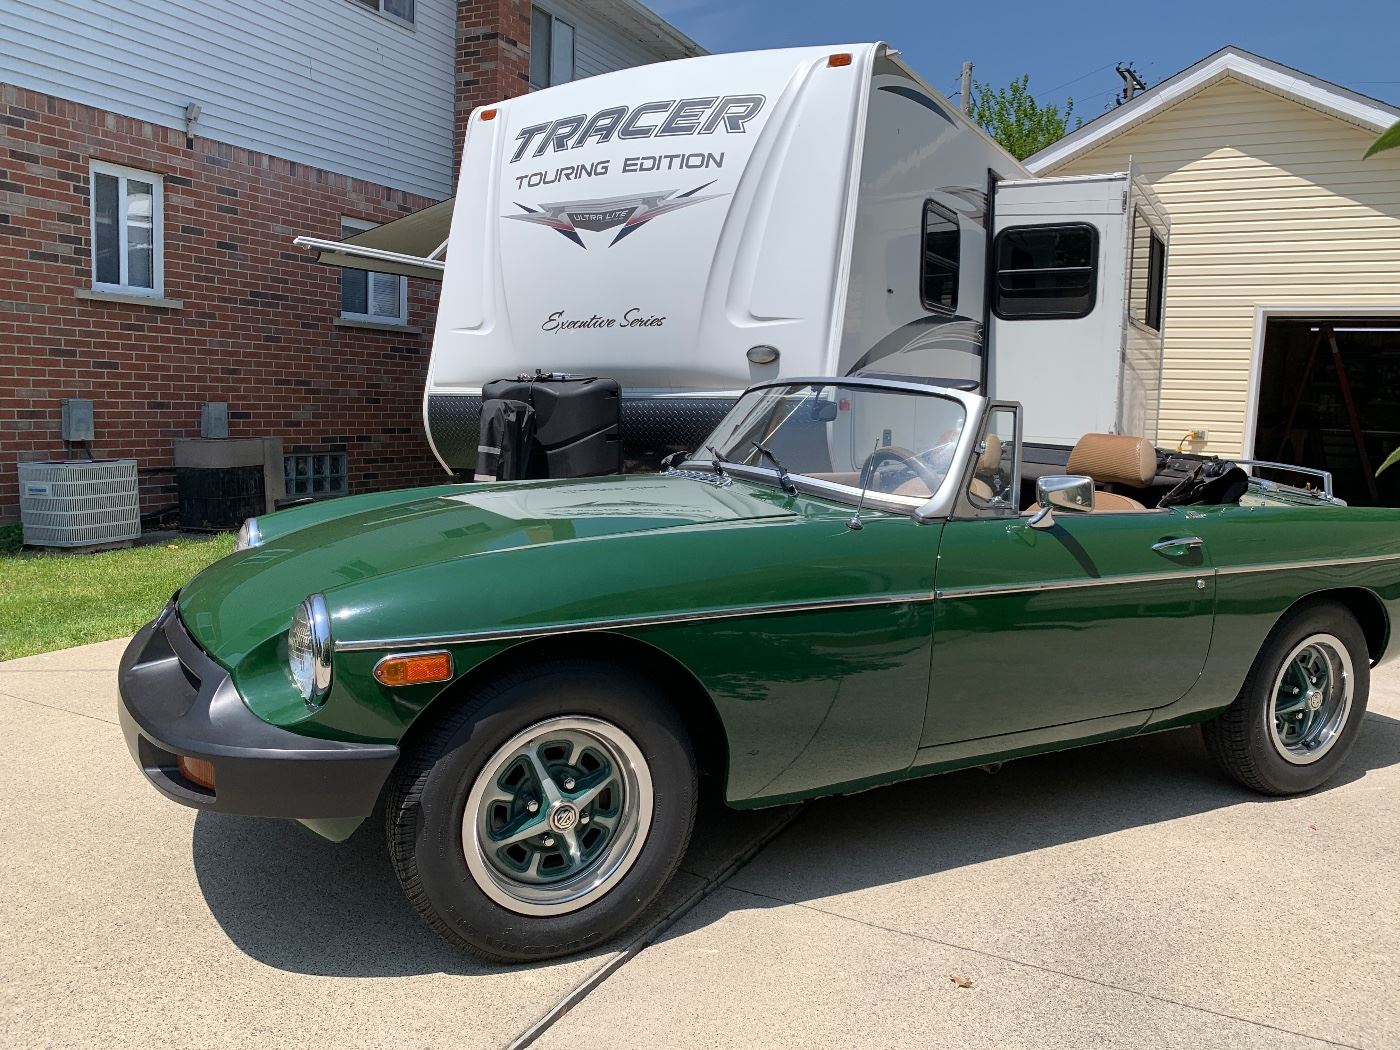 1979 MG with 78,000 miles, professionally maintained. Fantastic summer car! (More pictures at end)